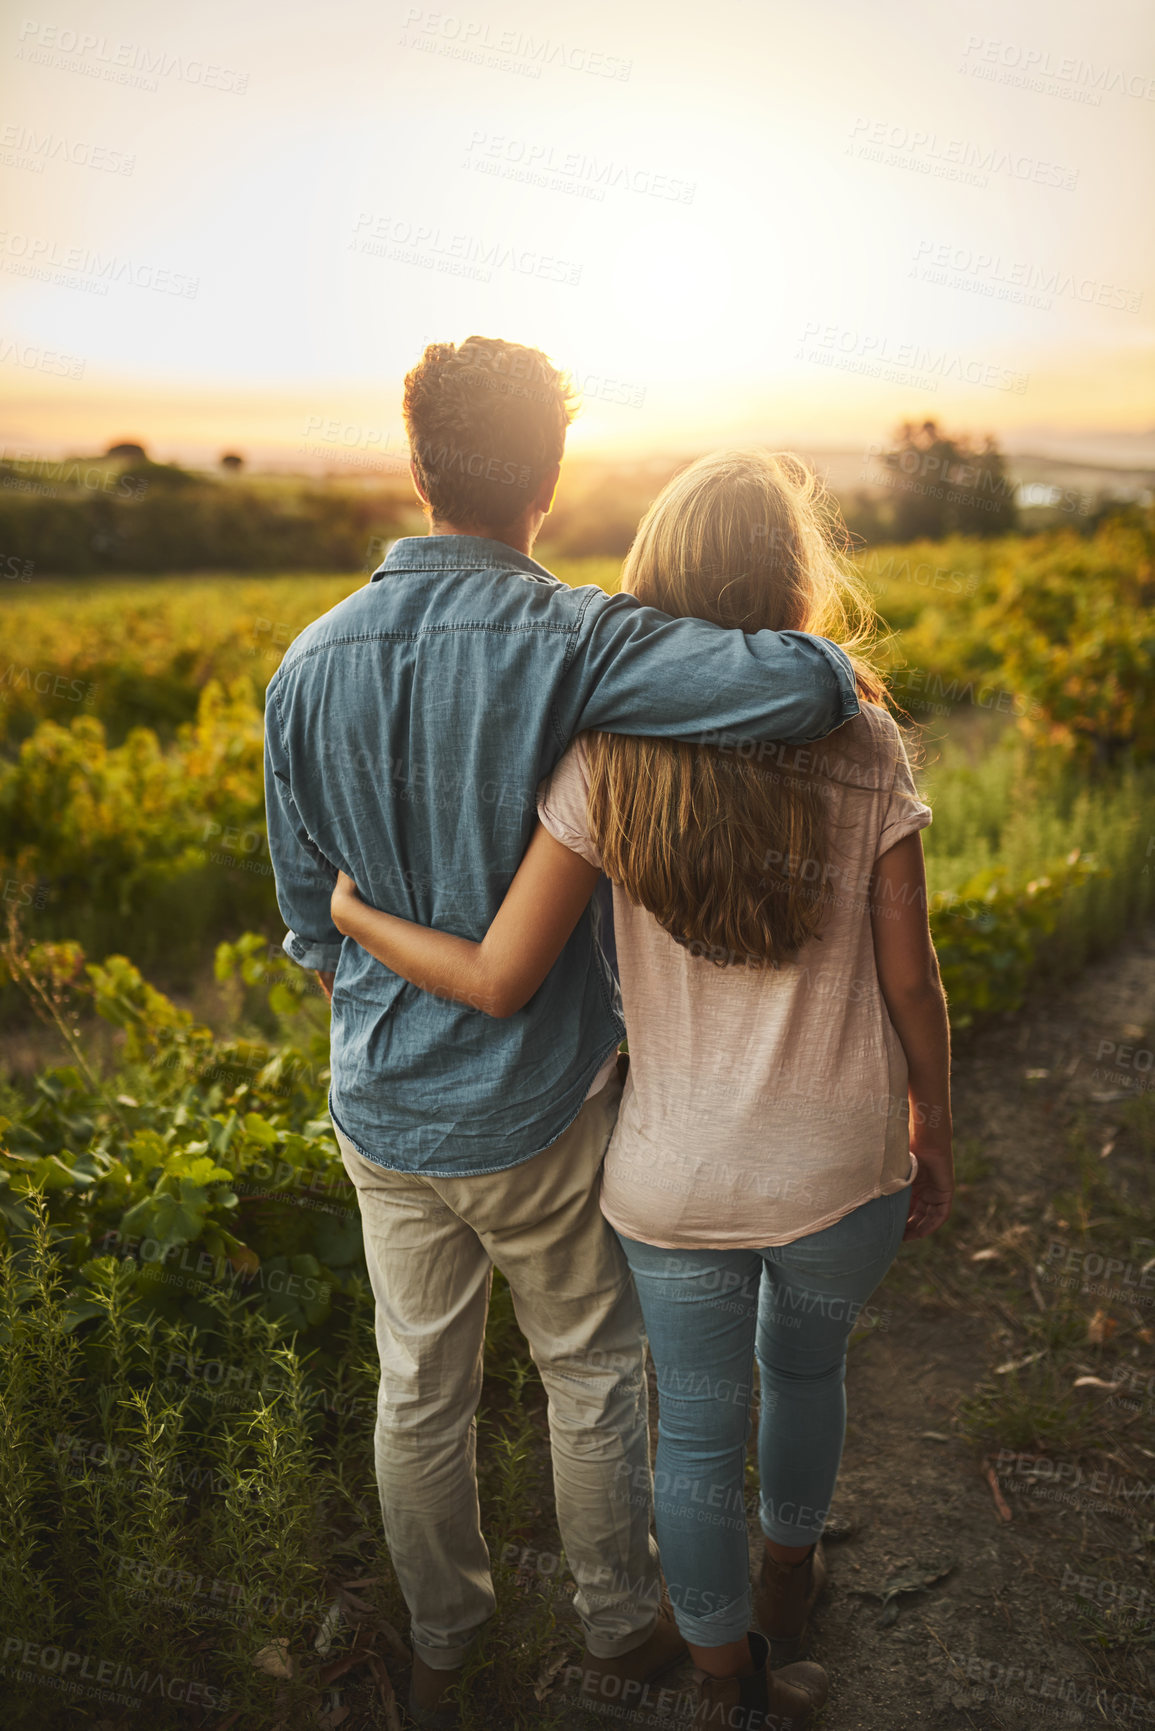 Buy stock photo Shot of a young couple walking through their crops while holding each other and looking into the horizon